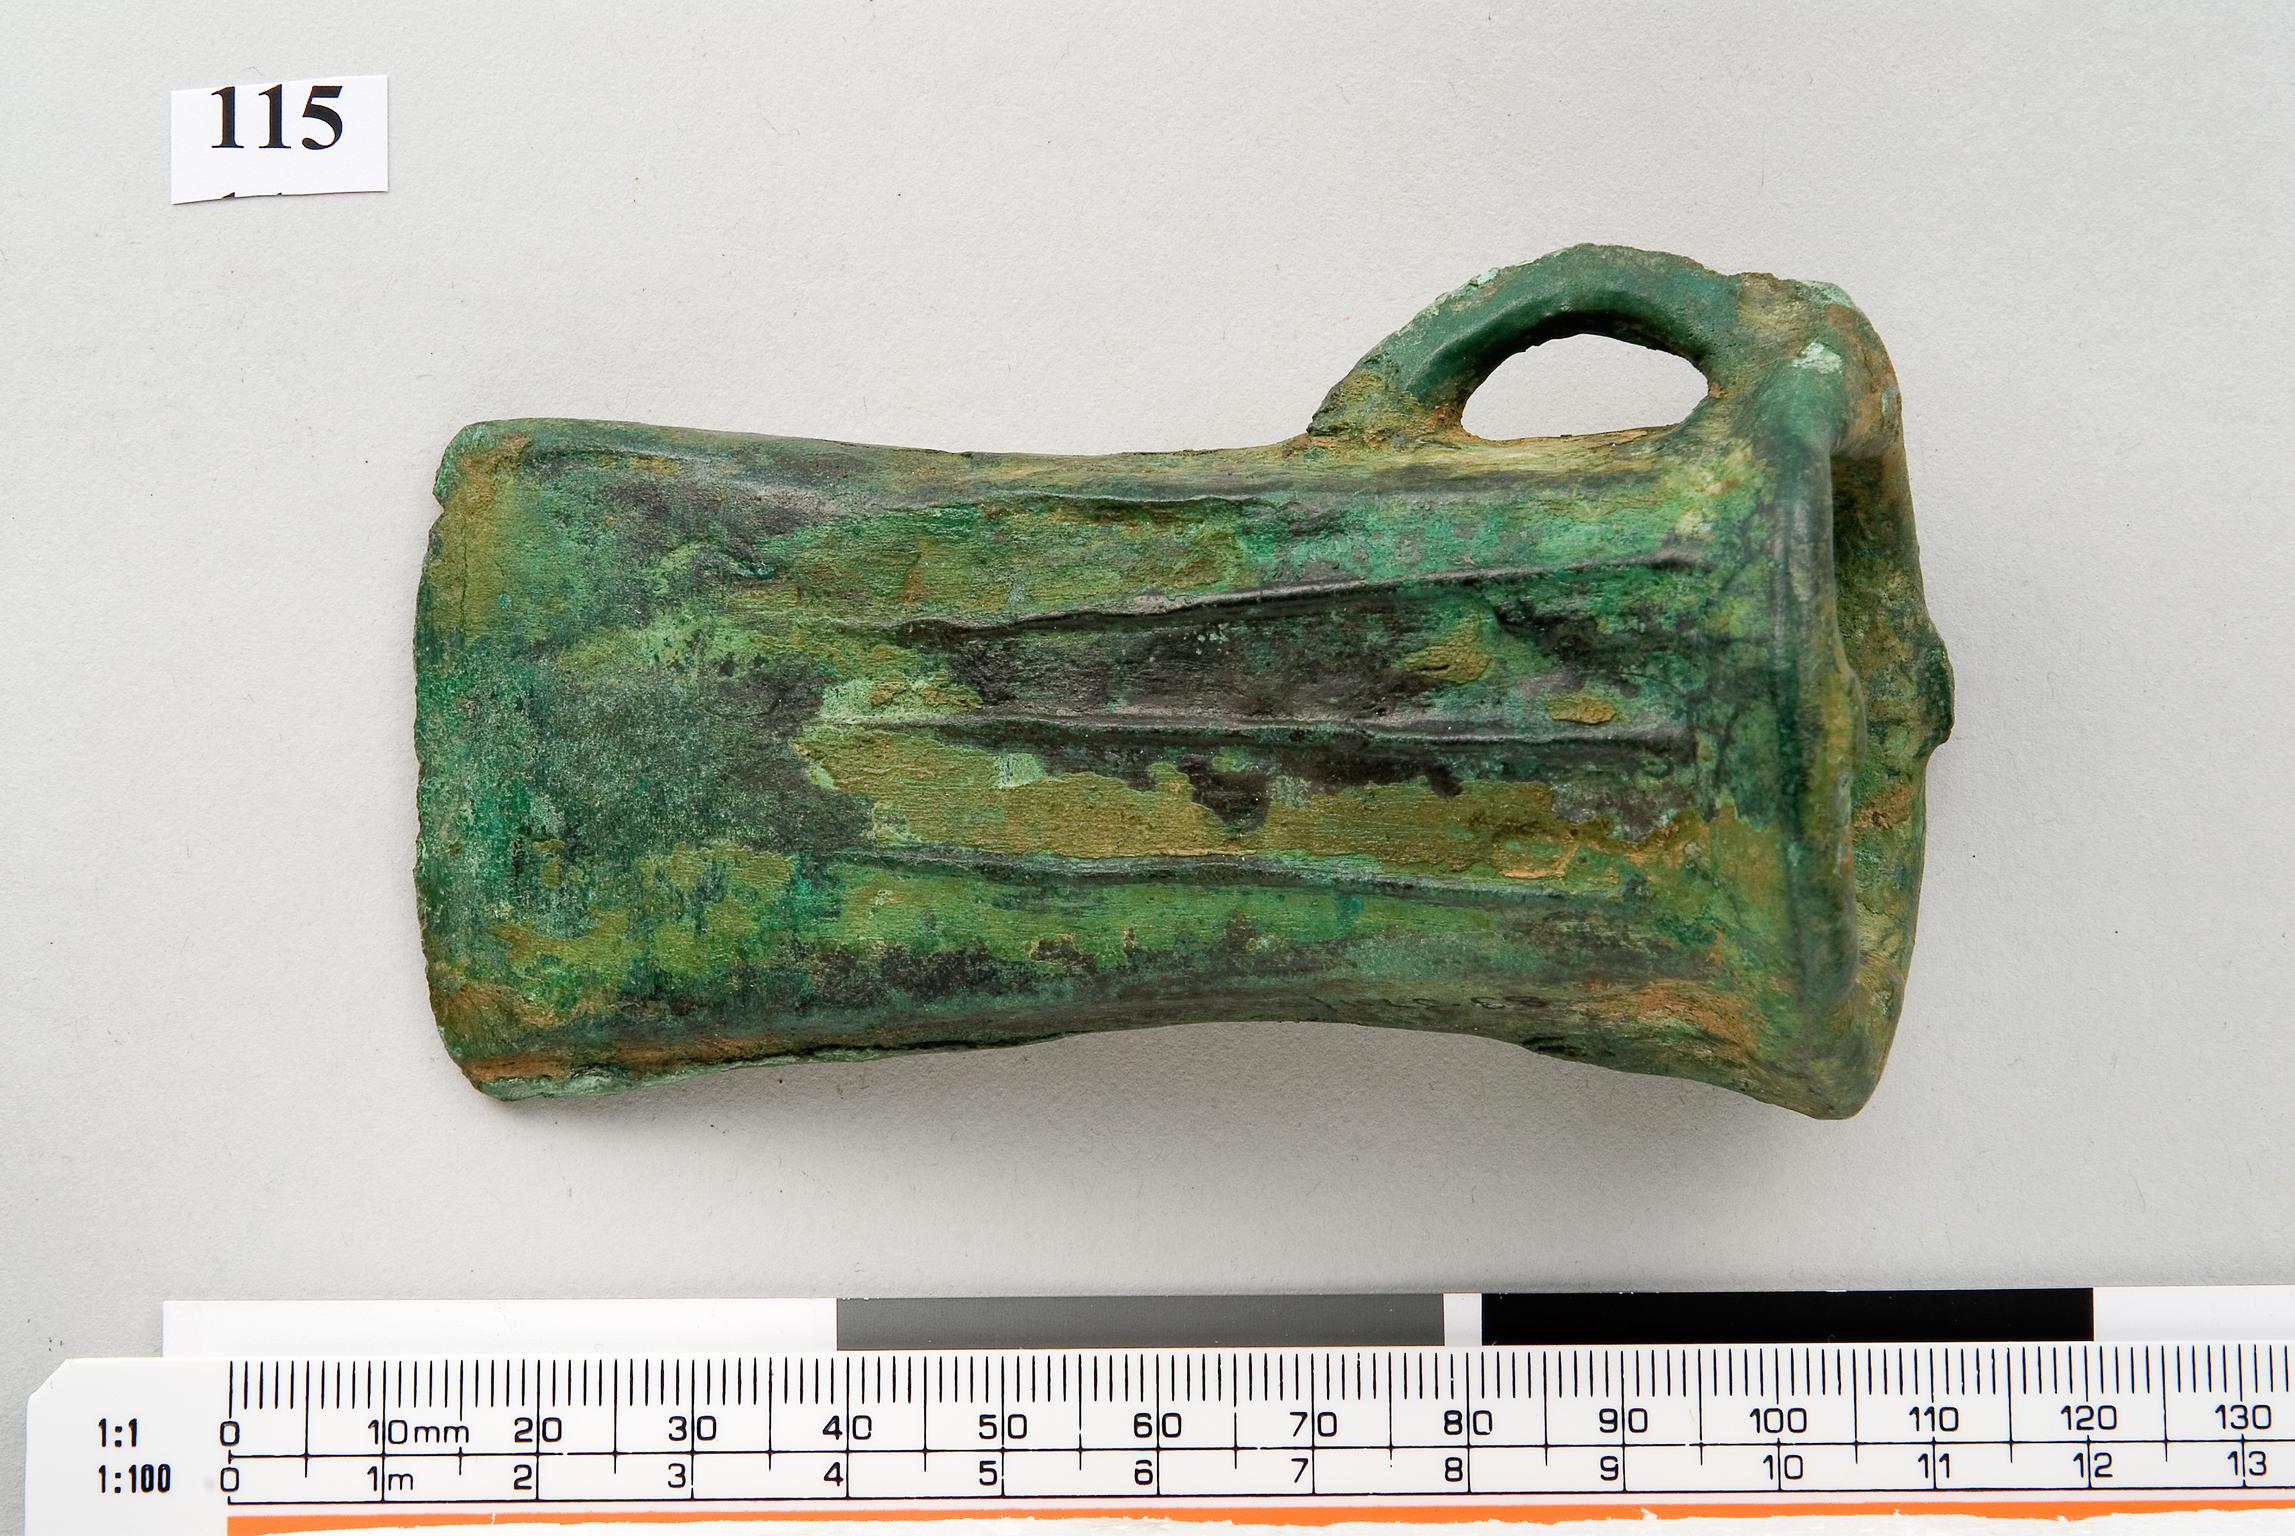 Late Bronze Age bronze socketed axe